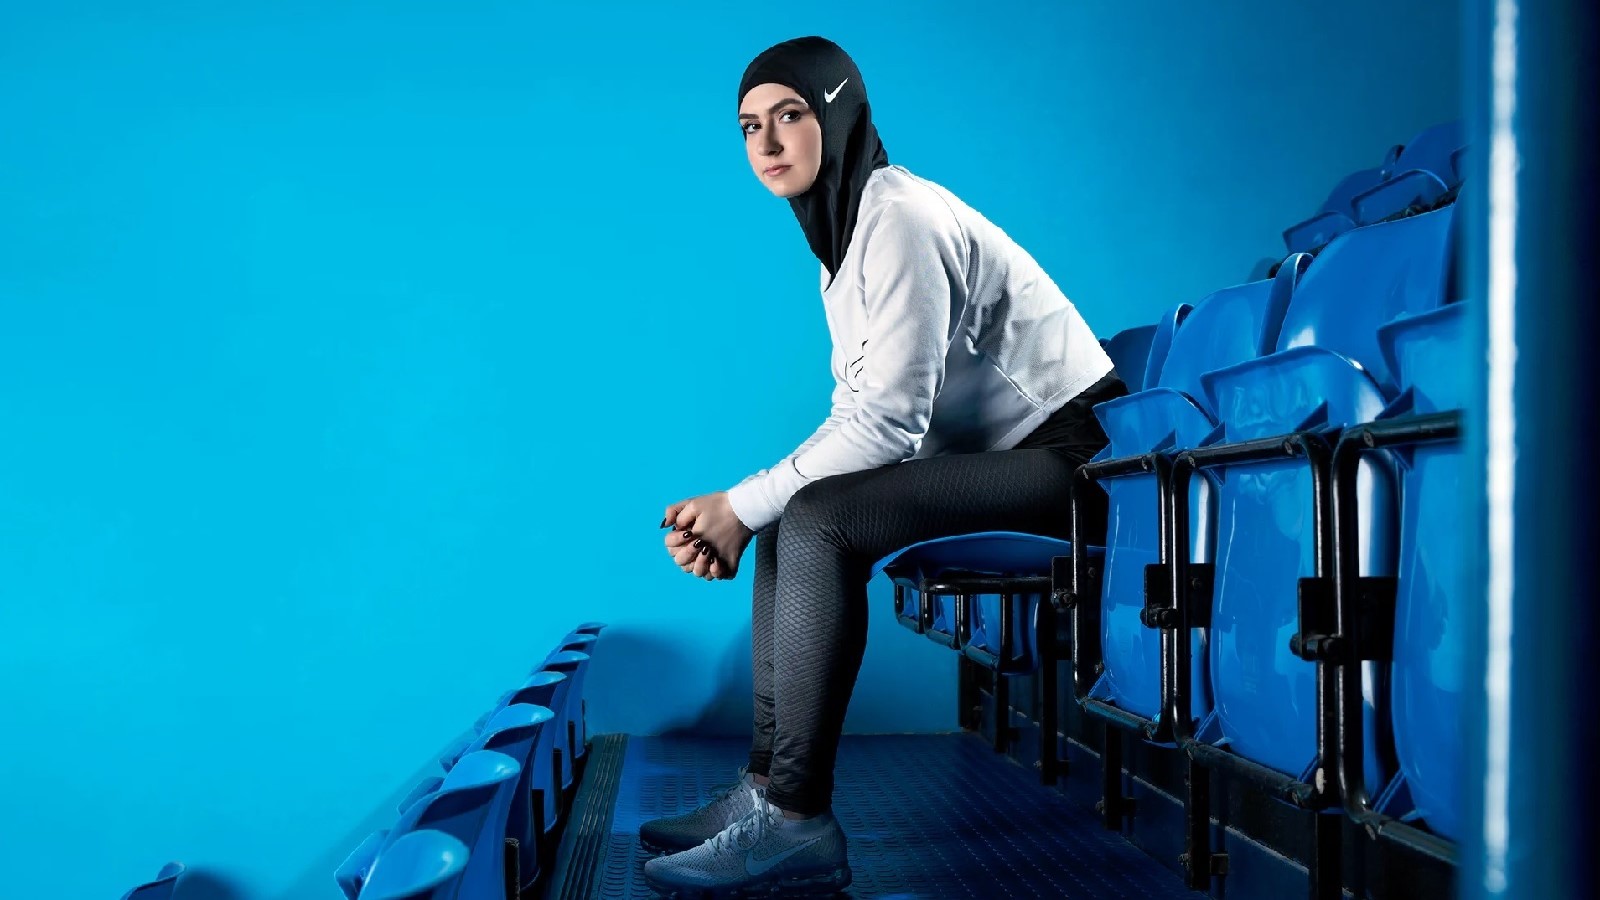 Nike Announces the ‘Pro Hijab’ Especially Designed for Muslim Female Athletes